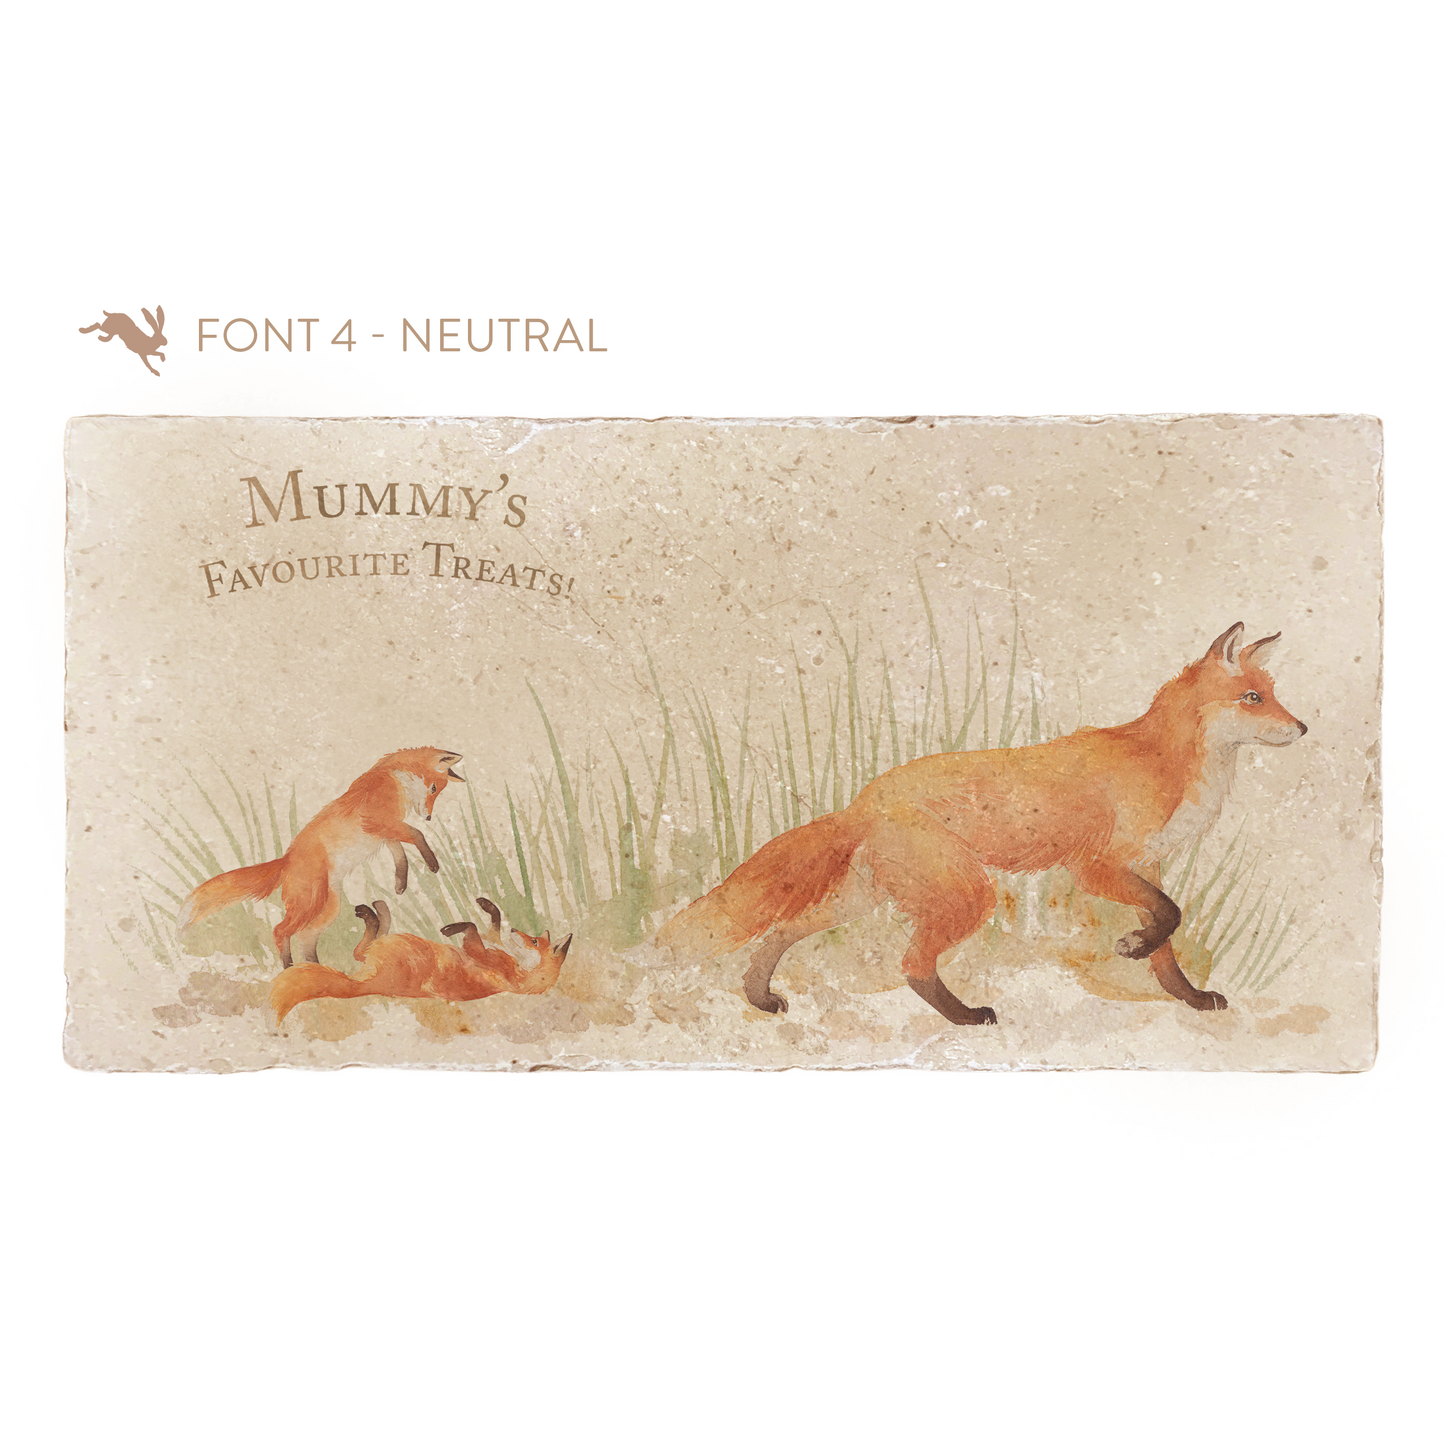 A personalised rectangular marble sharing platter featuring a fox design. The example personalised neutral colour text reads 'Mummy's Favourite Treats!' in a classic serif font.